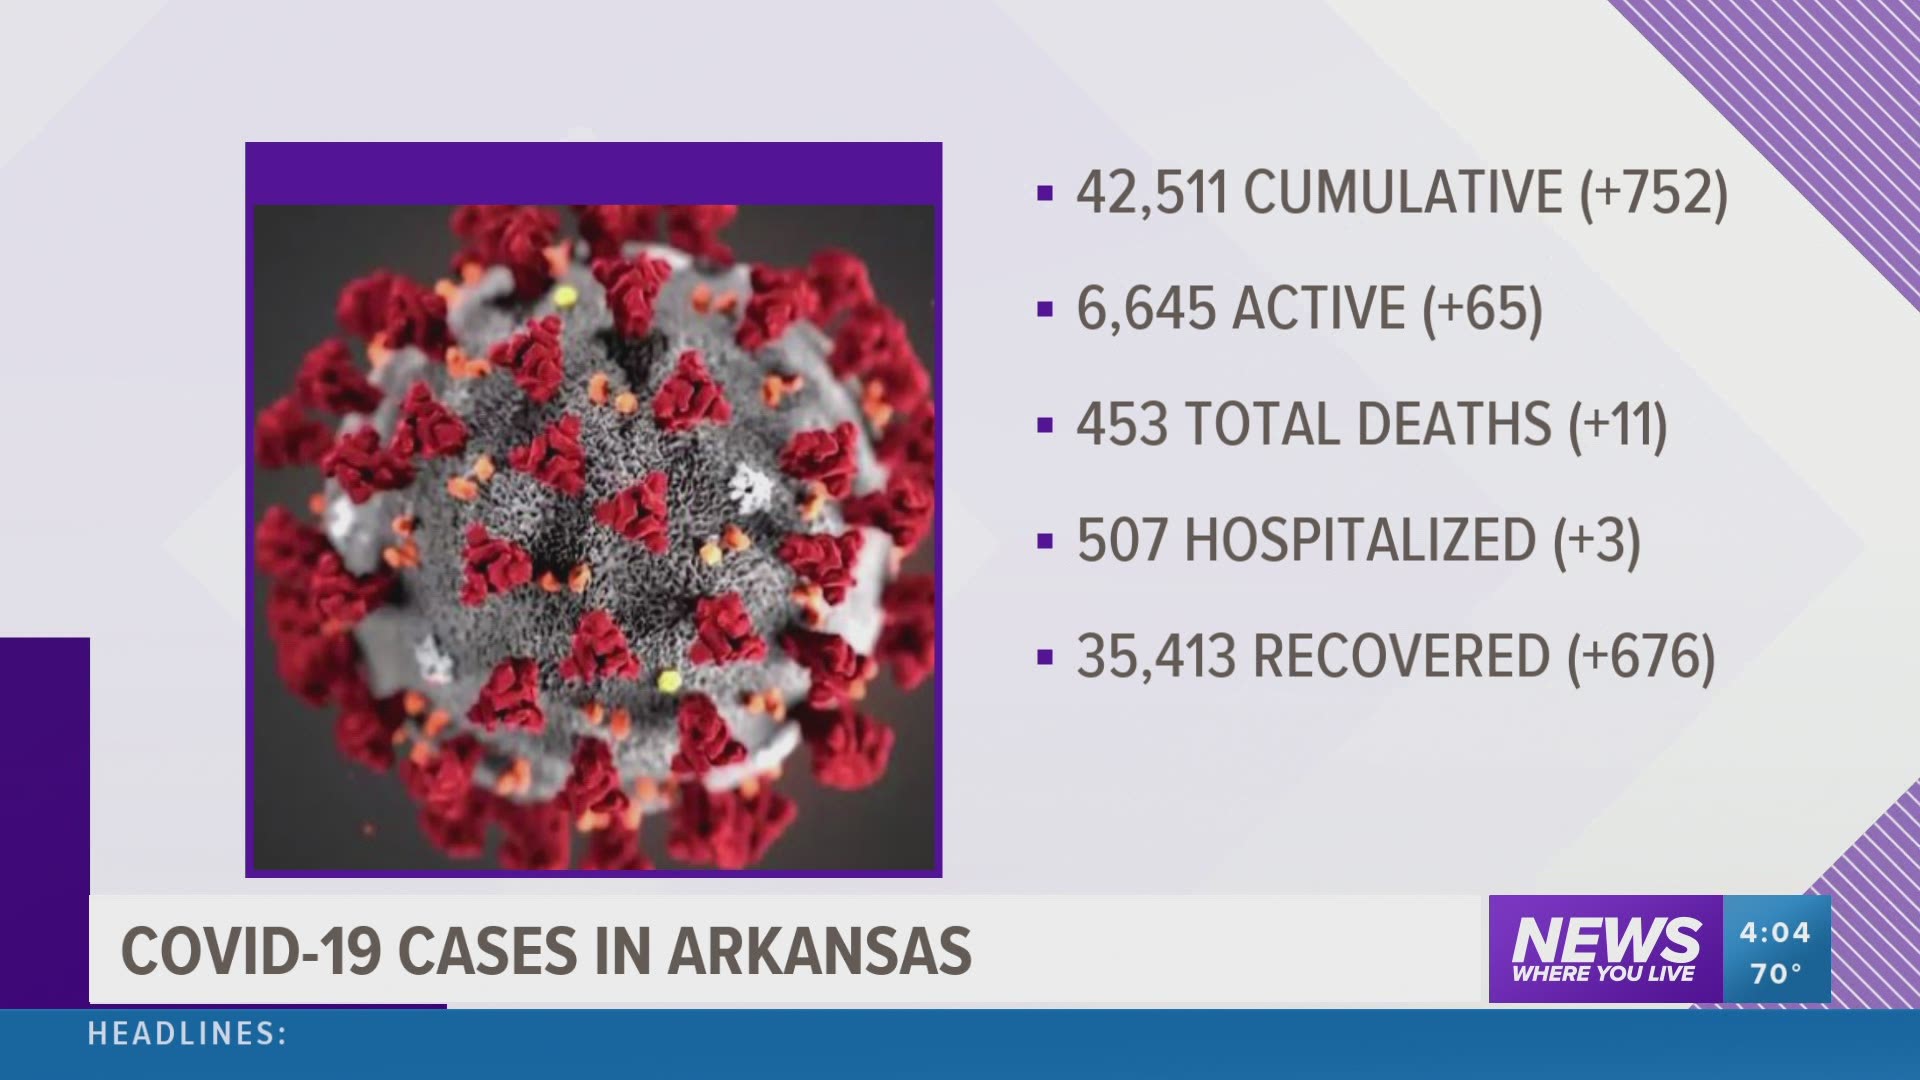 A look at the latest case numbers for the coronavirus in Arkansas on Friday, July 31. https://bit.ly/2P9Dwg5